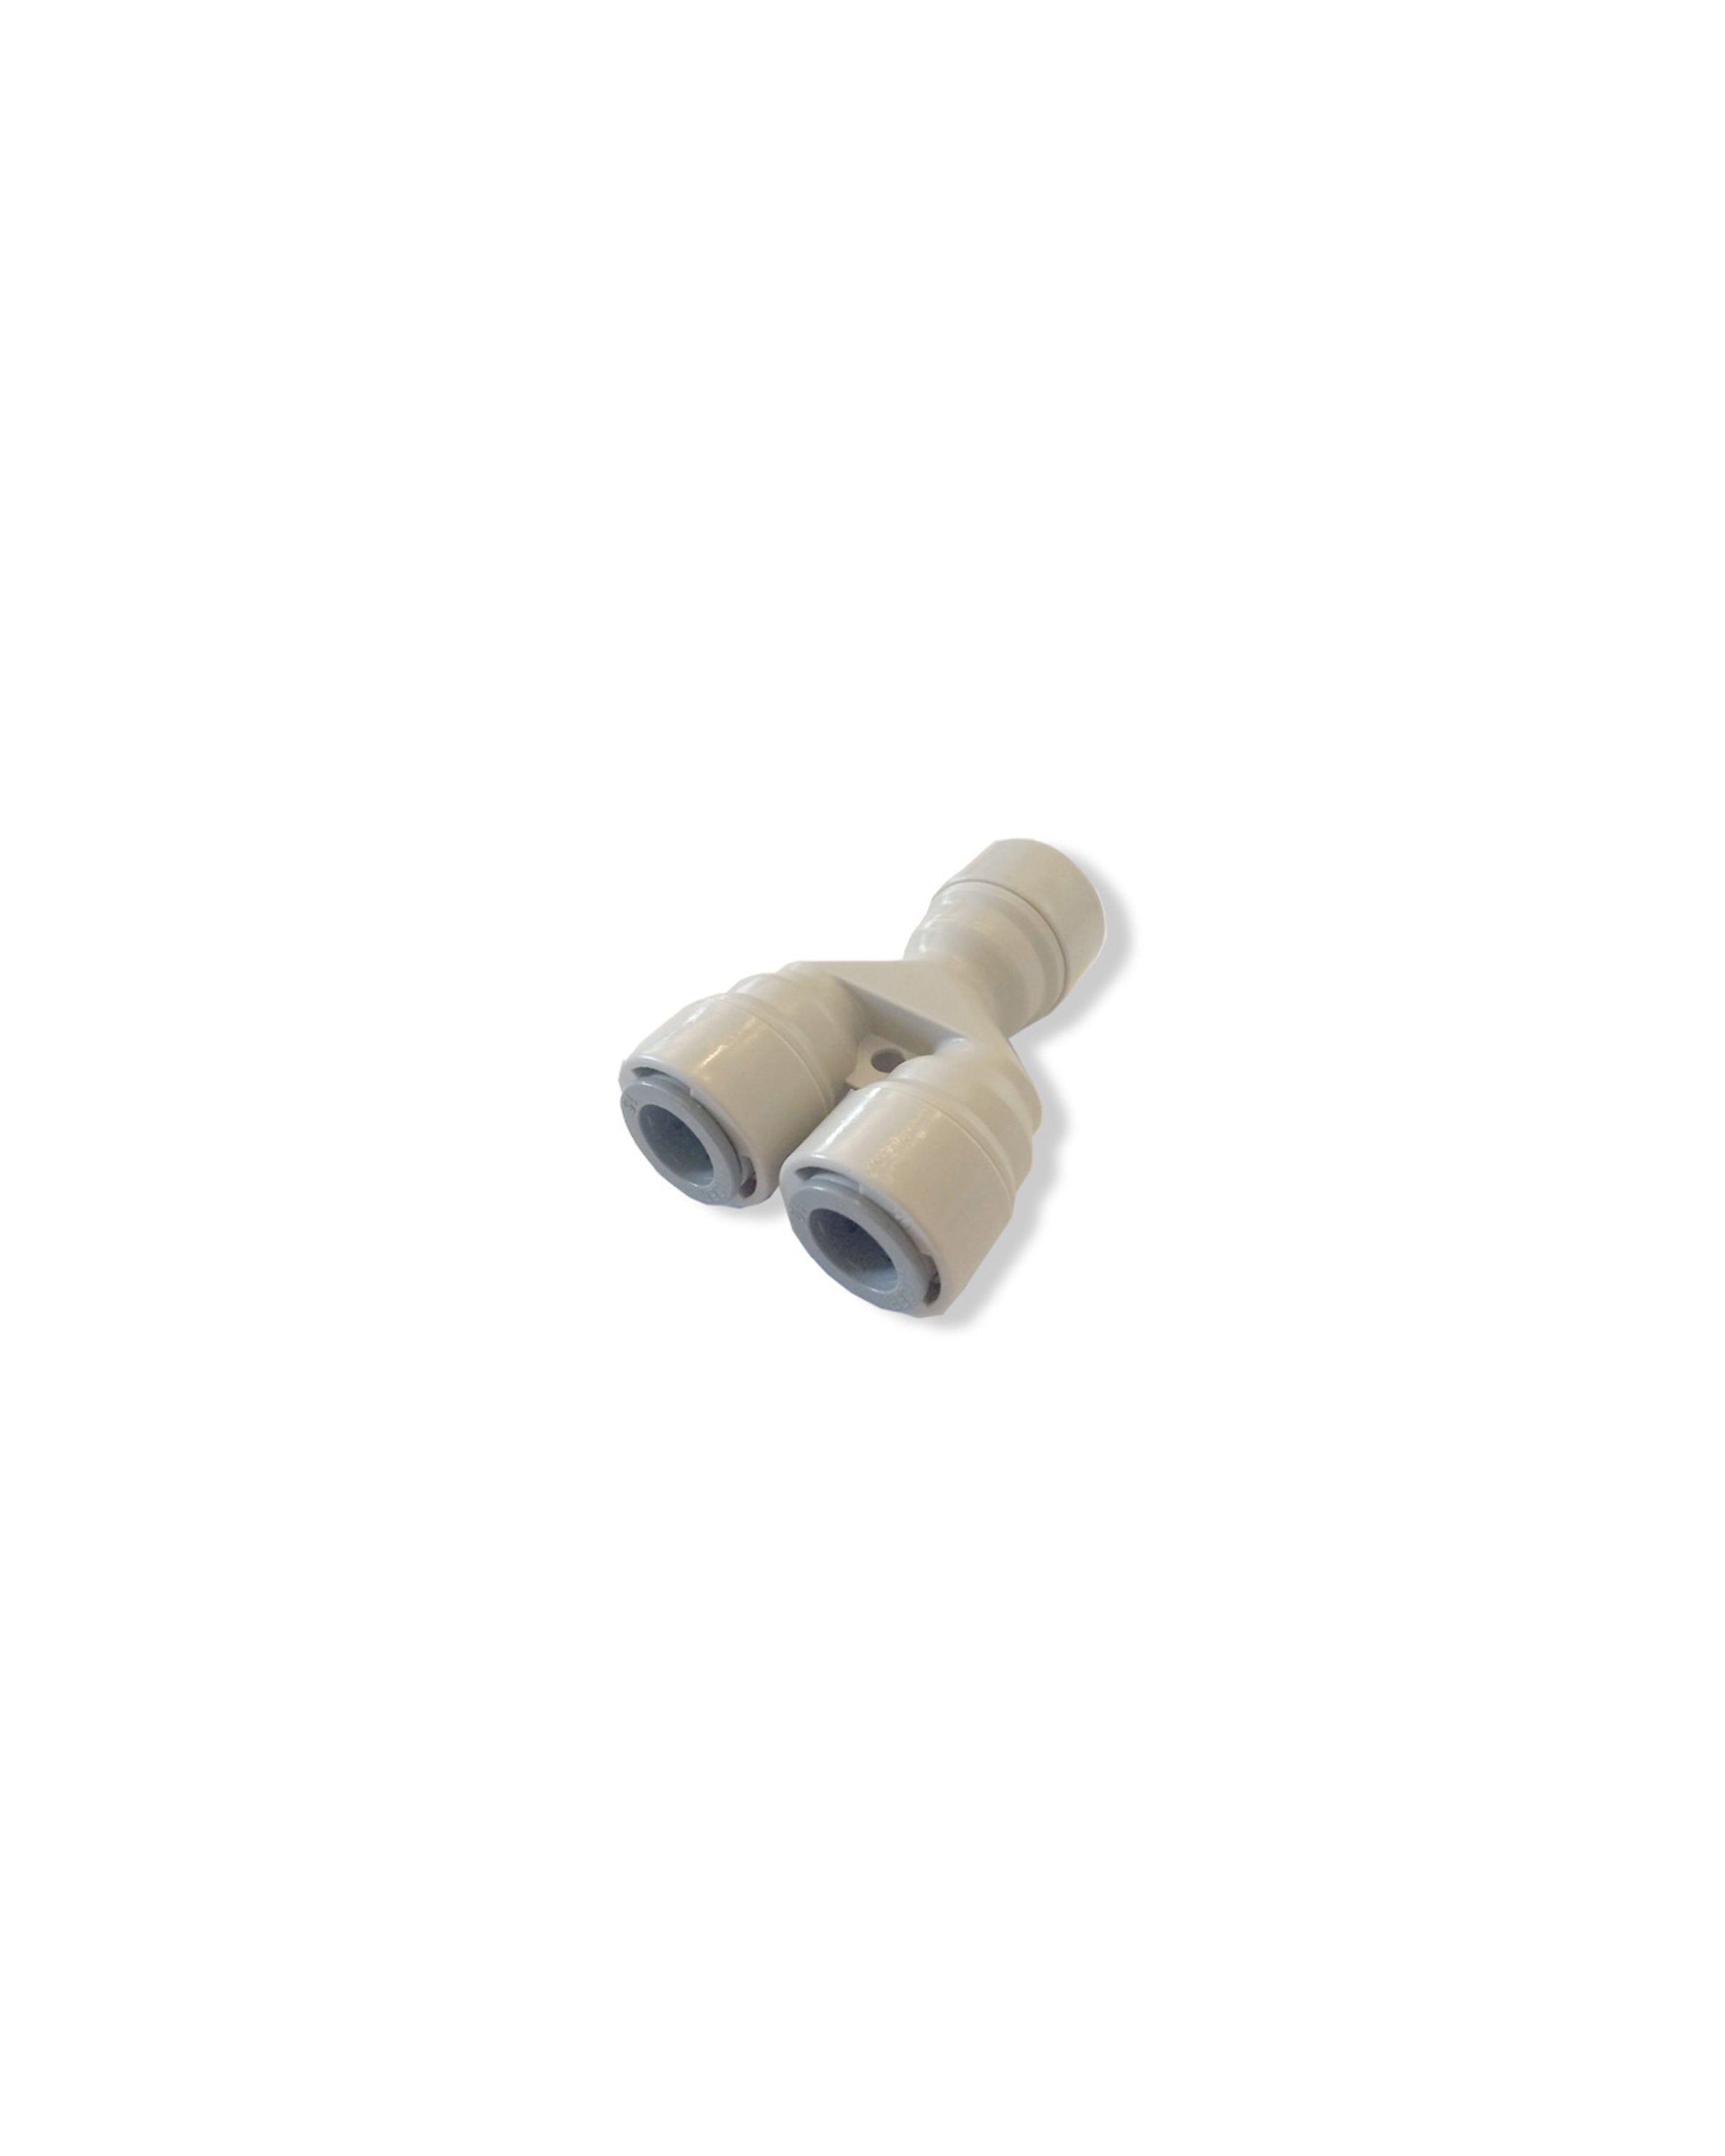 y connector part for portable misting system